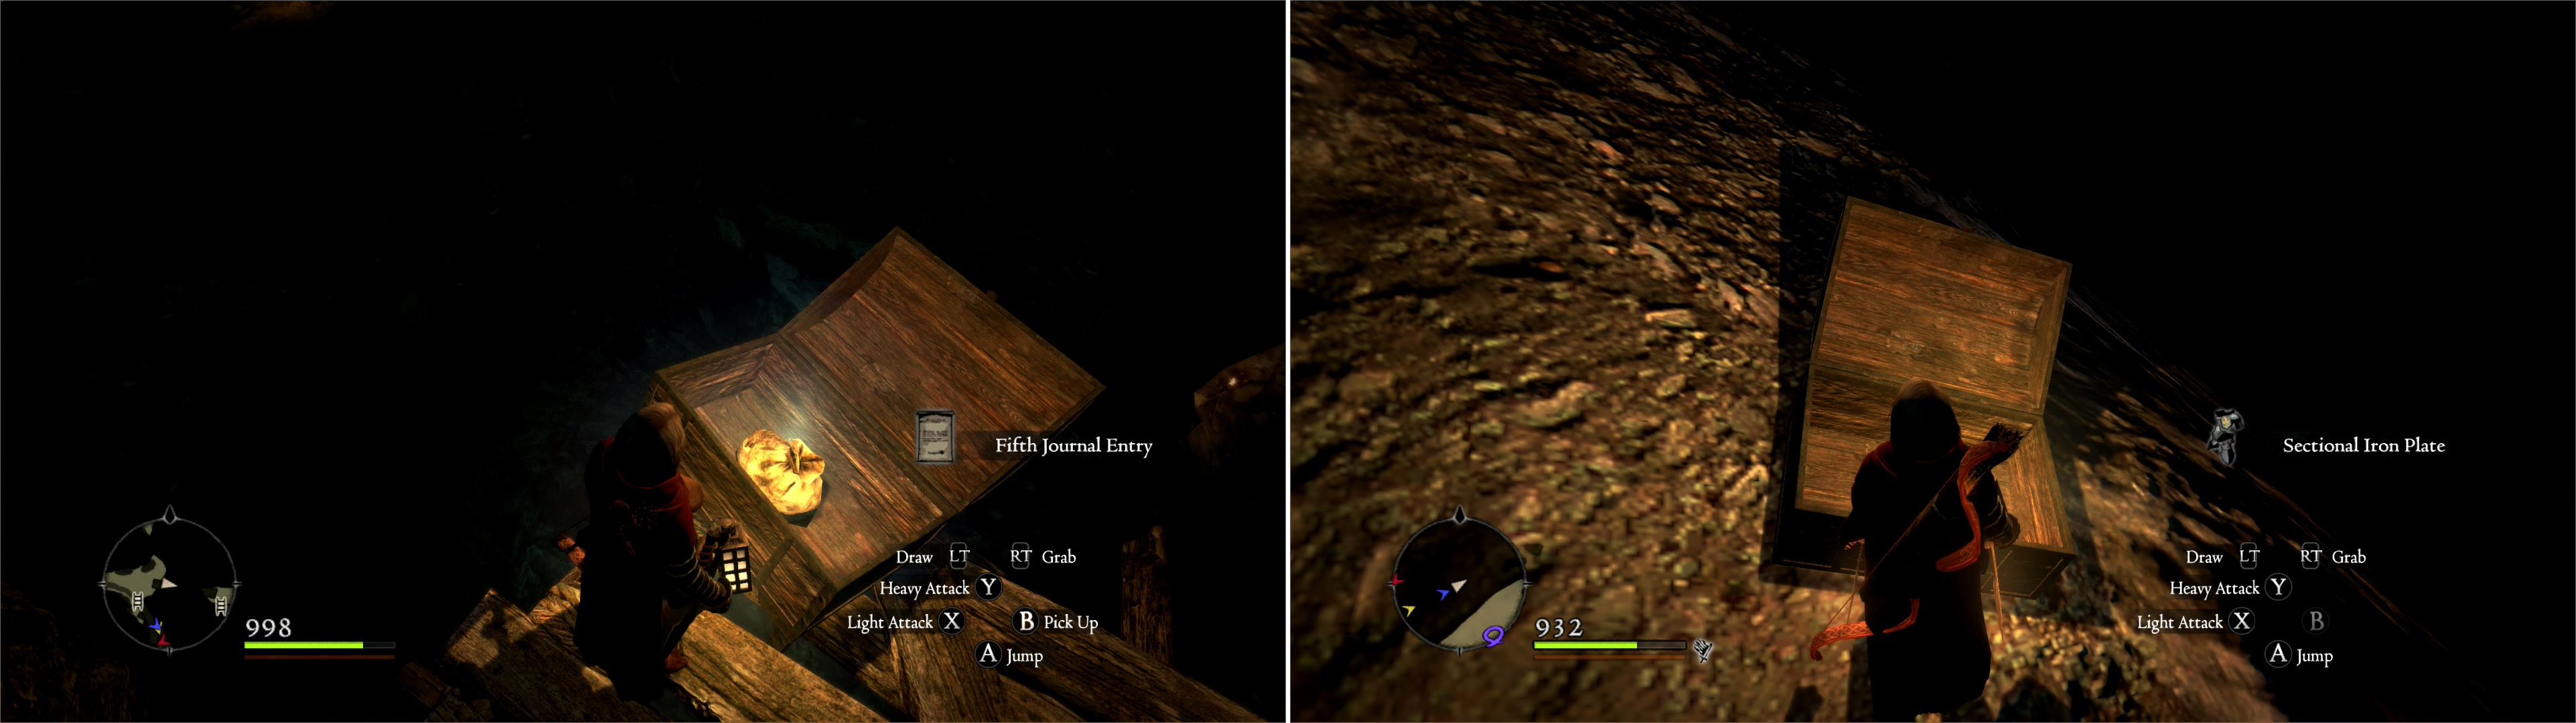 On a ledge overlooking Soulflayer Canyon you can find the Fifth Journal Entry (left). After plundering Soulflayer Canyon, find a chest on some cliffs for some parting treasure (right).